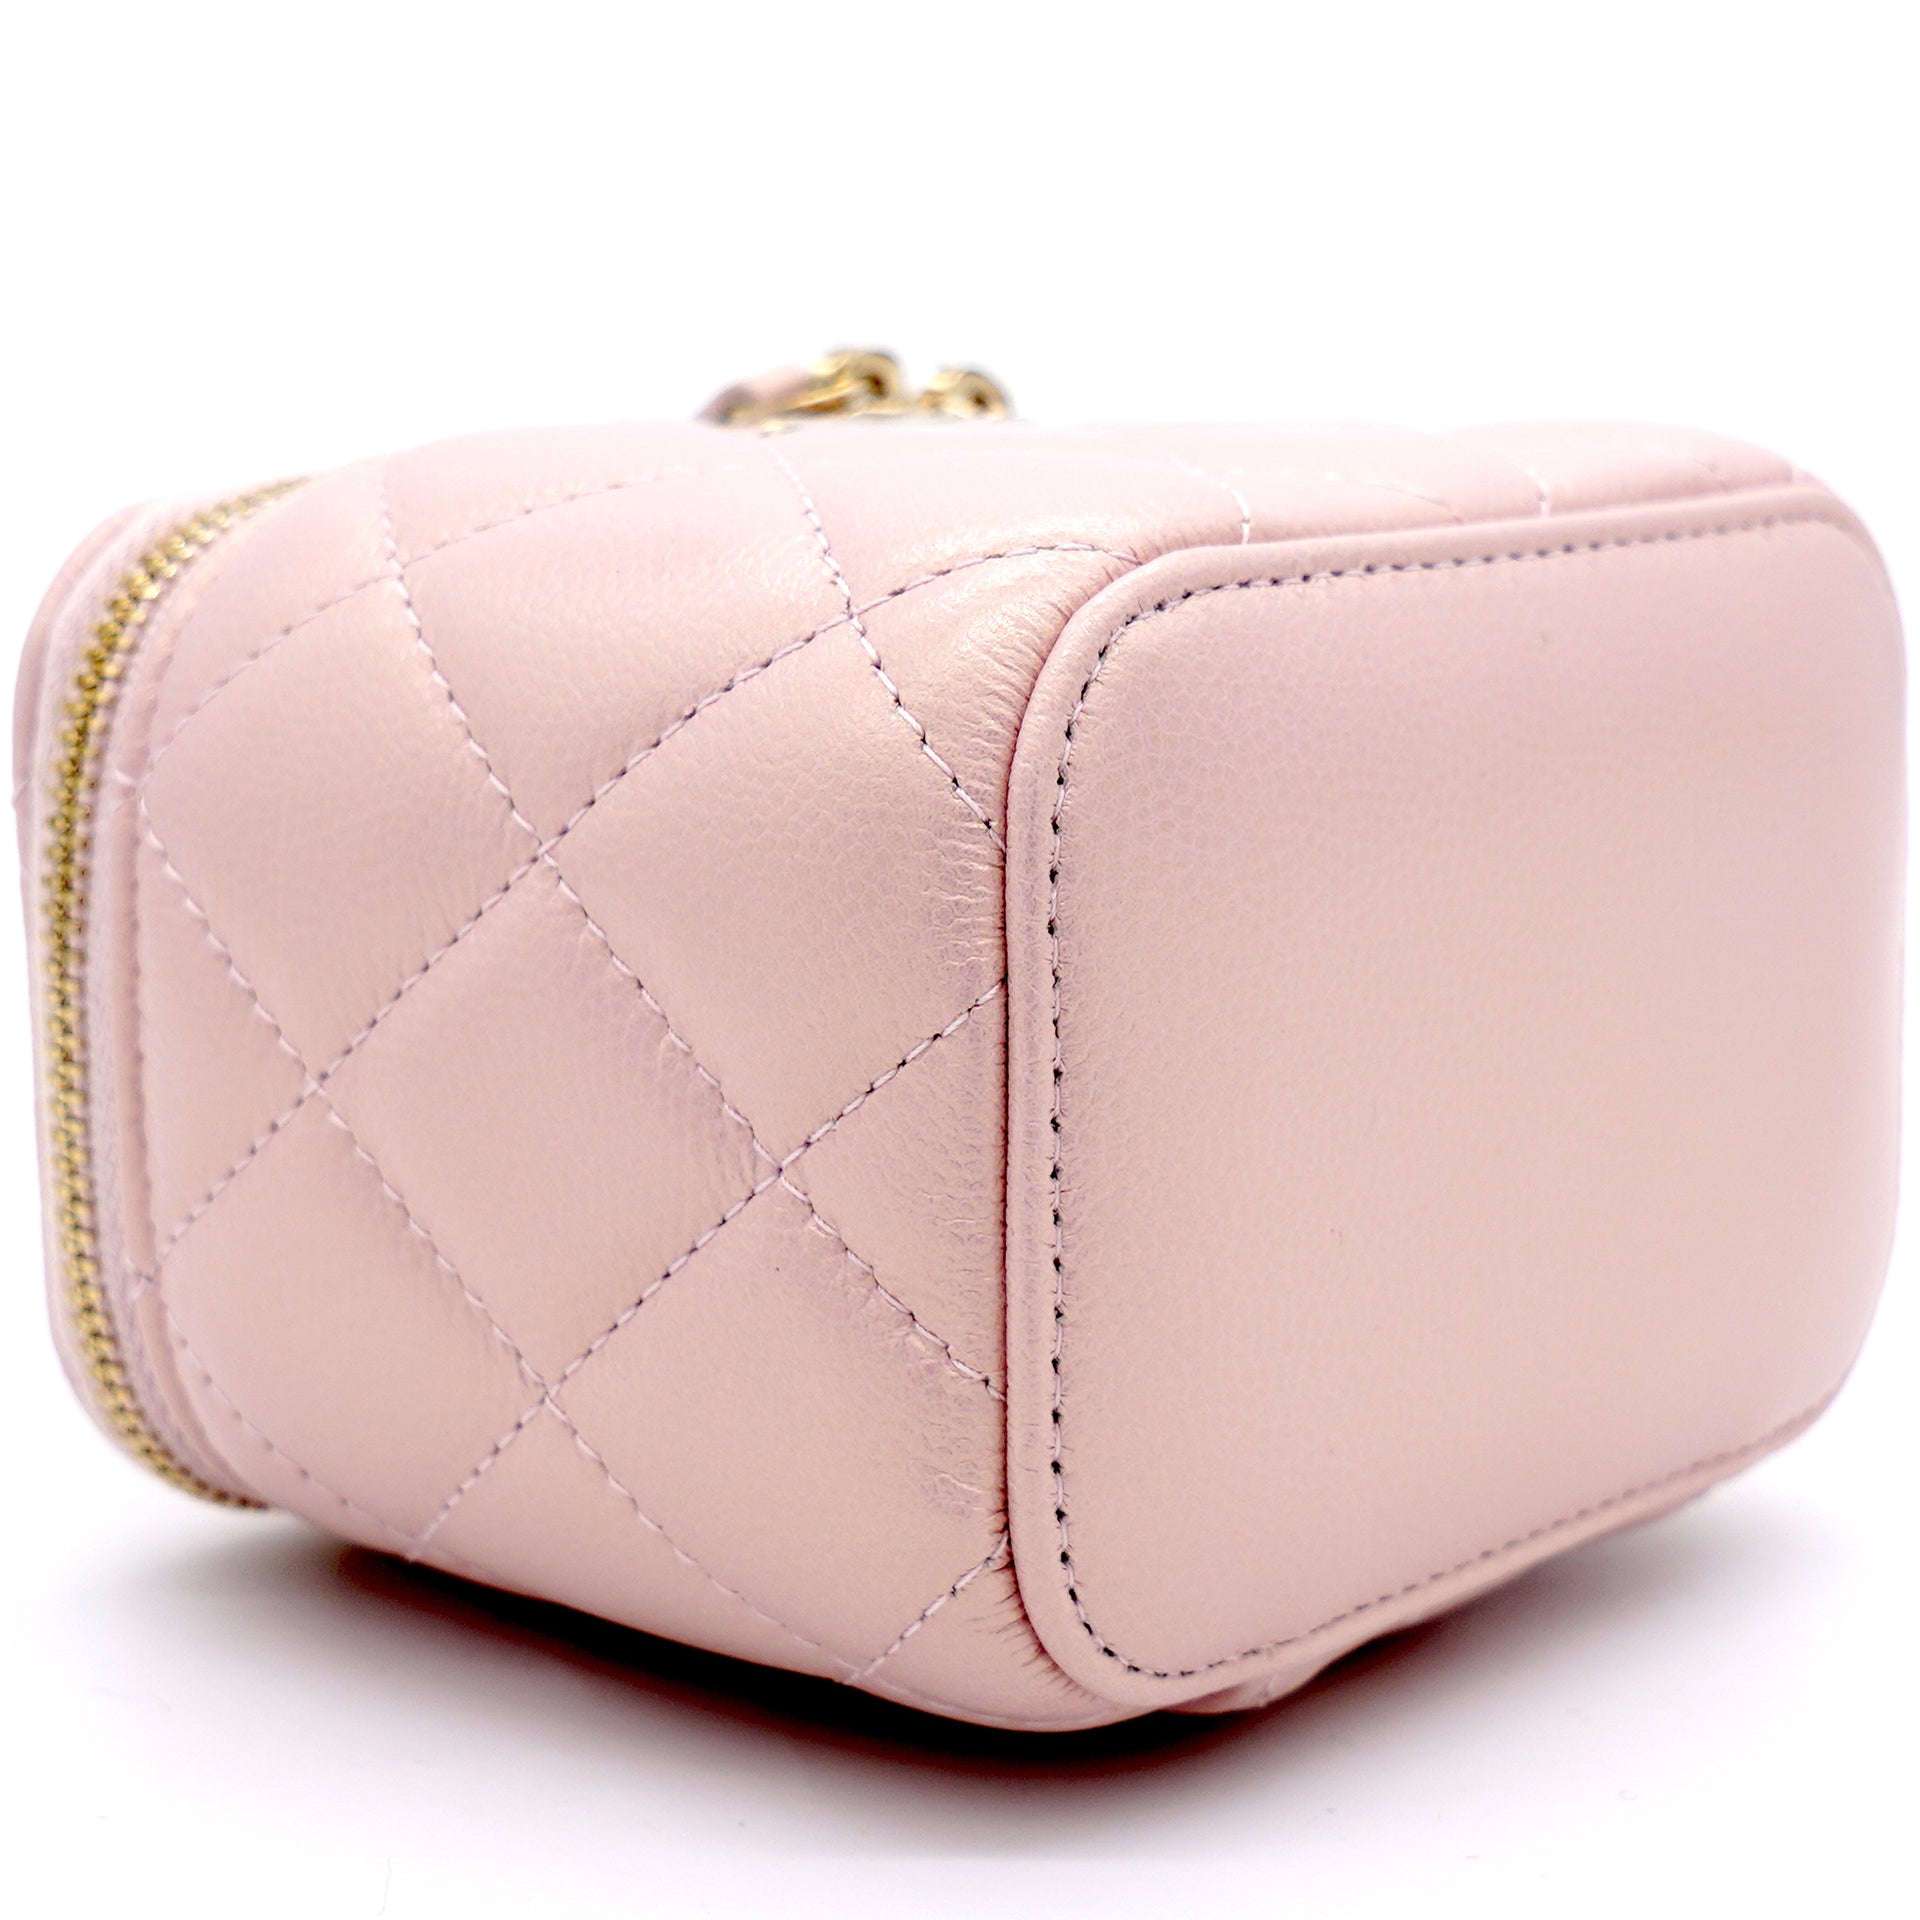 Mini Caviar GHW Vanity Case with Pearl Details Light Pink